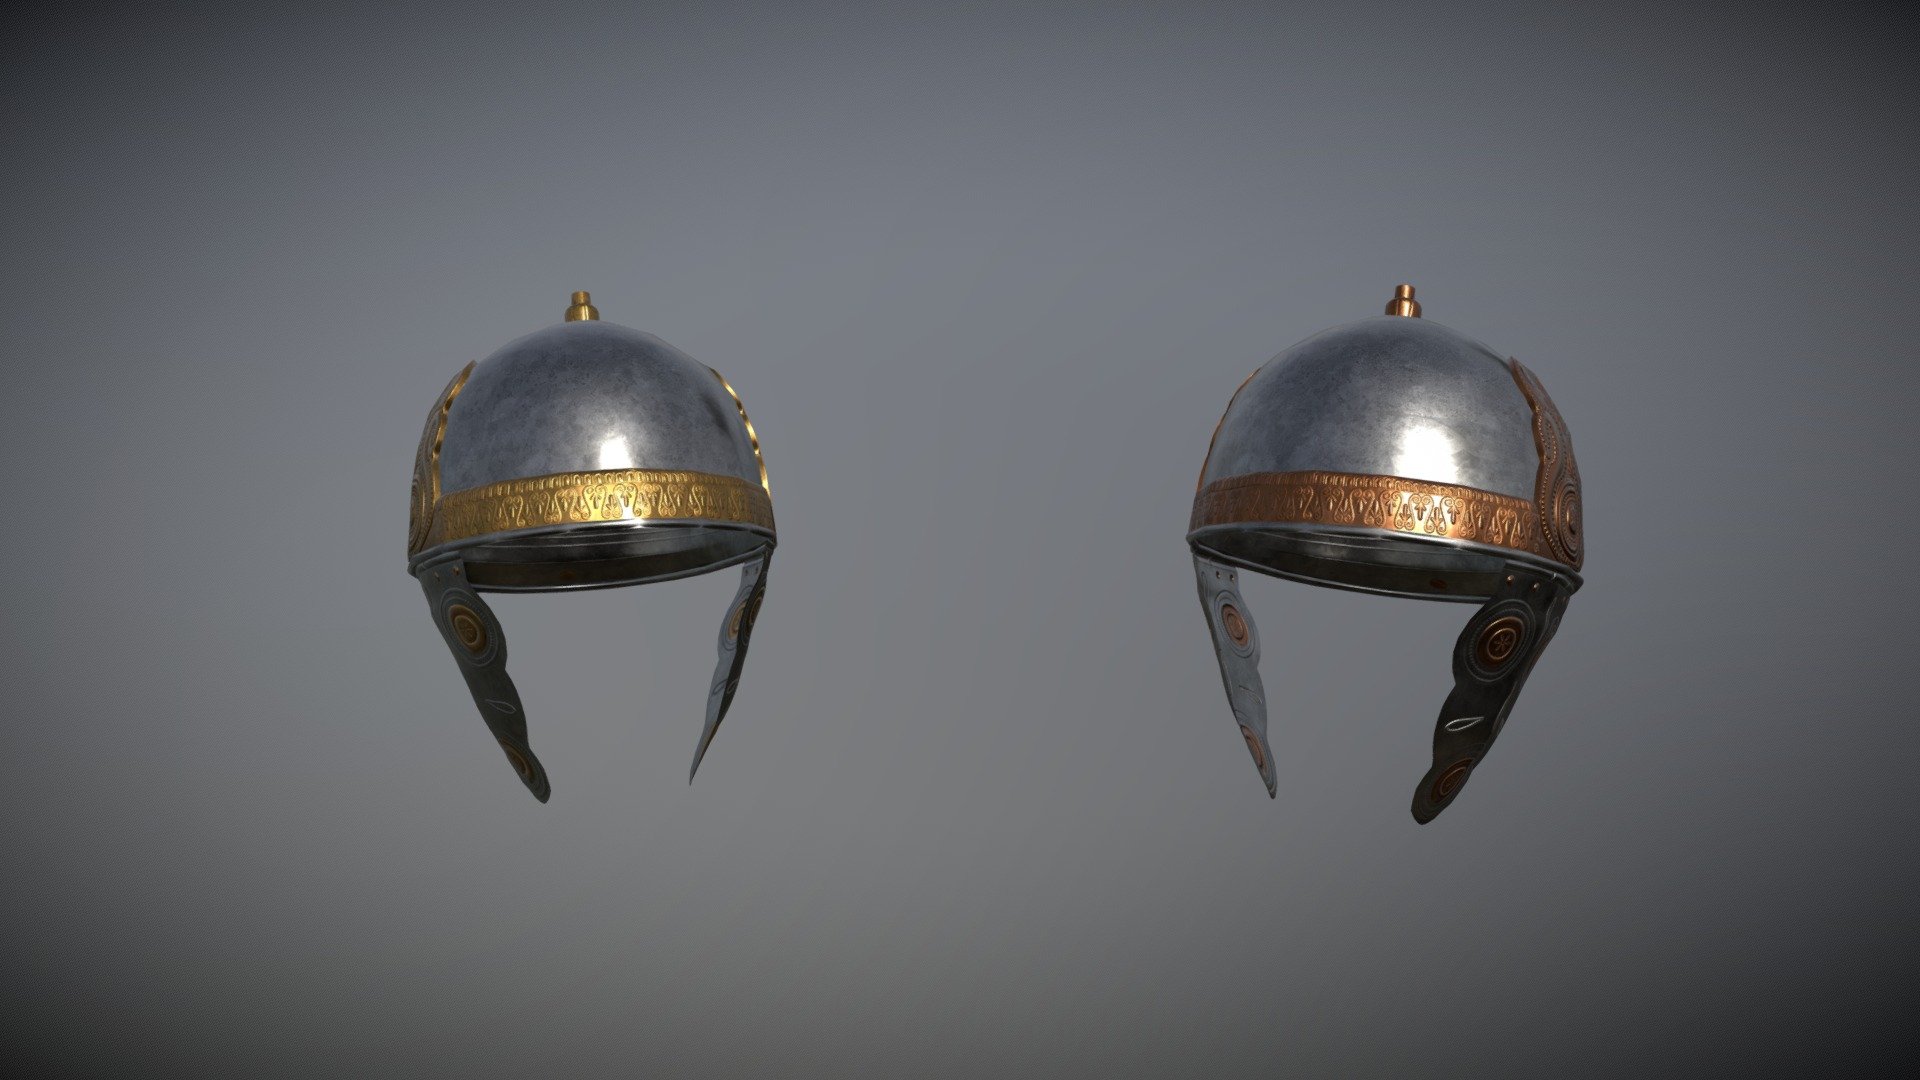 This is a Gottolengo helmet from Italy, from the 350 - 150 bc period. 

Made for the RIR: Imperium Surrectum mod, for the game Rome Total War Remastered.

Made in Blender - 1037 vertices

The creative process consists of modelling the low-poly version, followed by  high poly version through the use of the Multi-Res modifier. Any details that the piece might present are sculpted on this copy, after which, they are baked into its low poly counterpart. The goal here is to avoid modelling the additional detail - which would increase the vert count - while still maintaining the illusion that the helmet contains such details 3d model